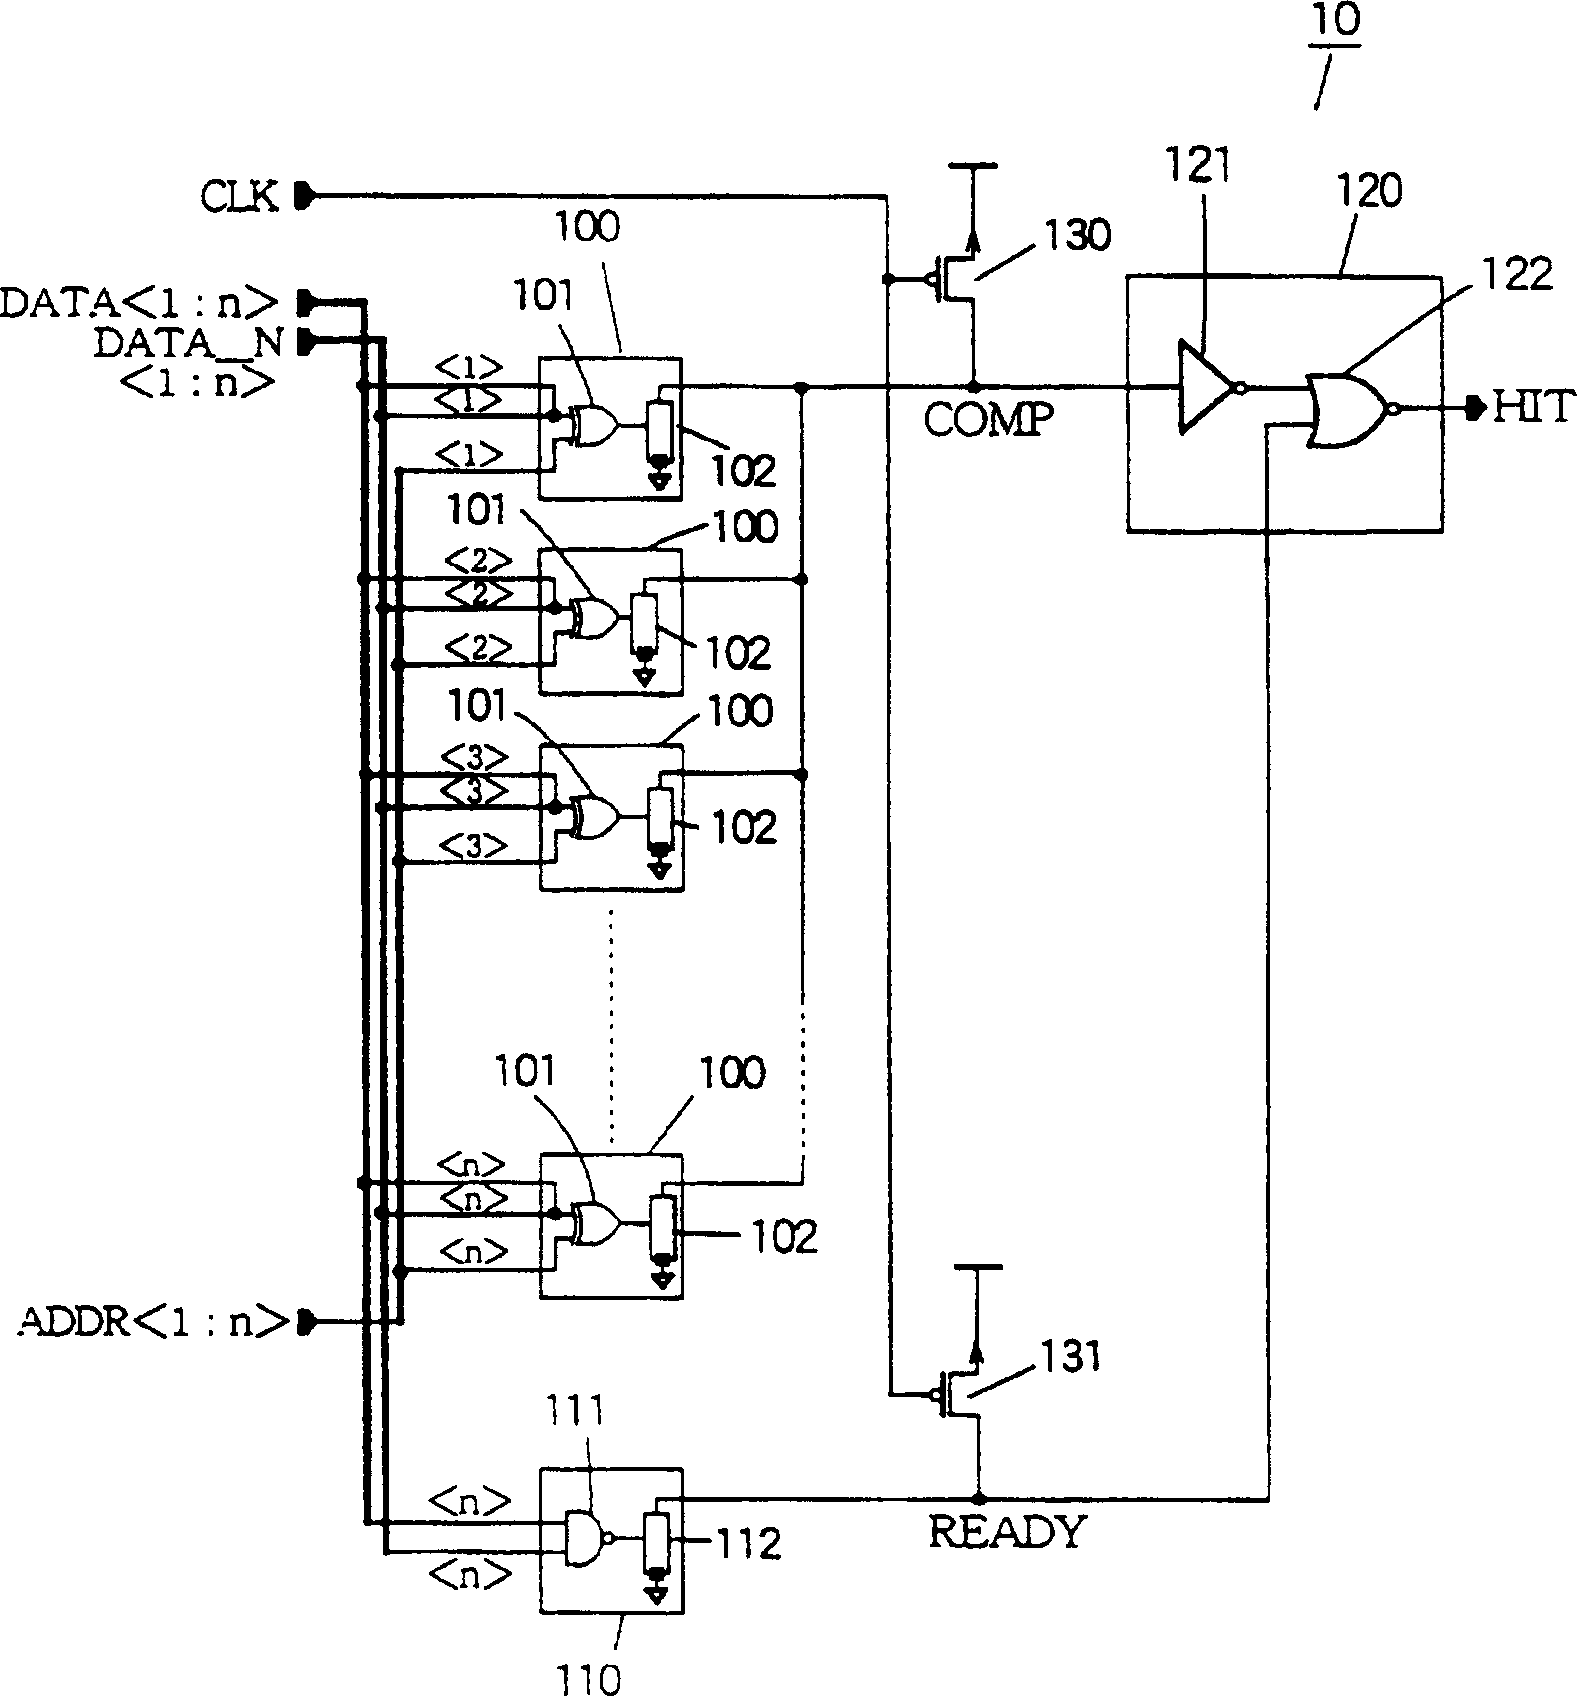 Multiple-bit comparator with reliable output timing and reduced hazards